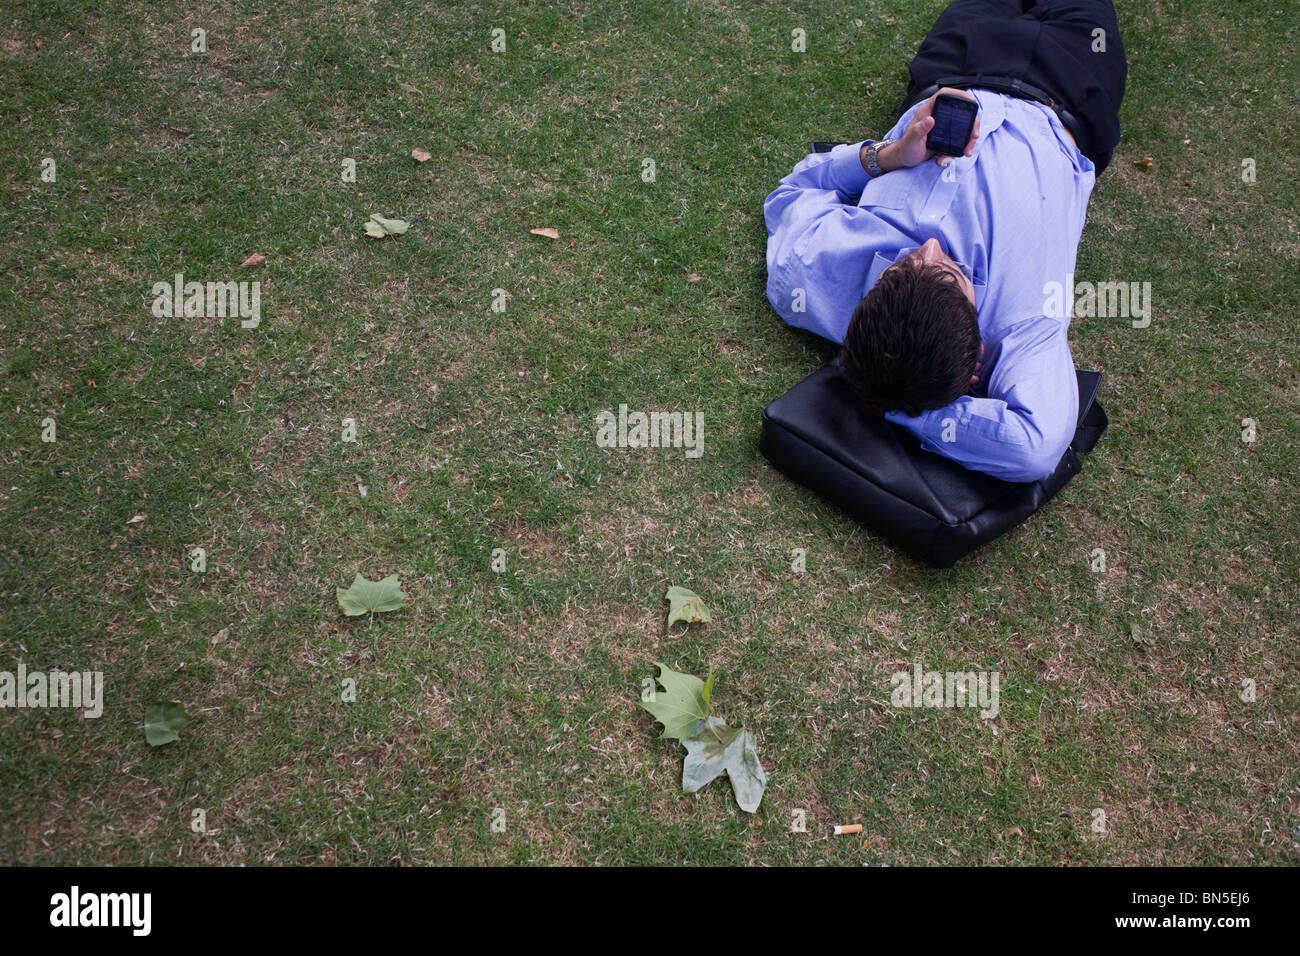 Young businessman fiddles with his touch pad iPhone during a lunchtime break on the grass in St. Paul's cathedral churchyard. Stock Photo